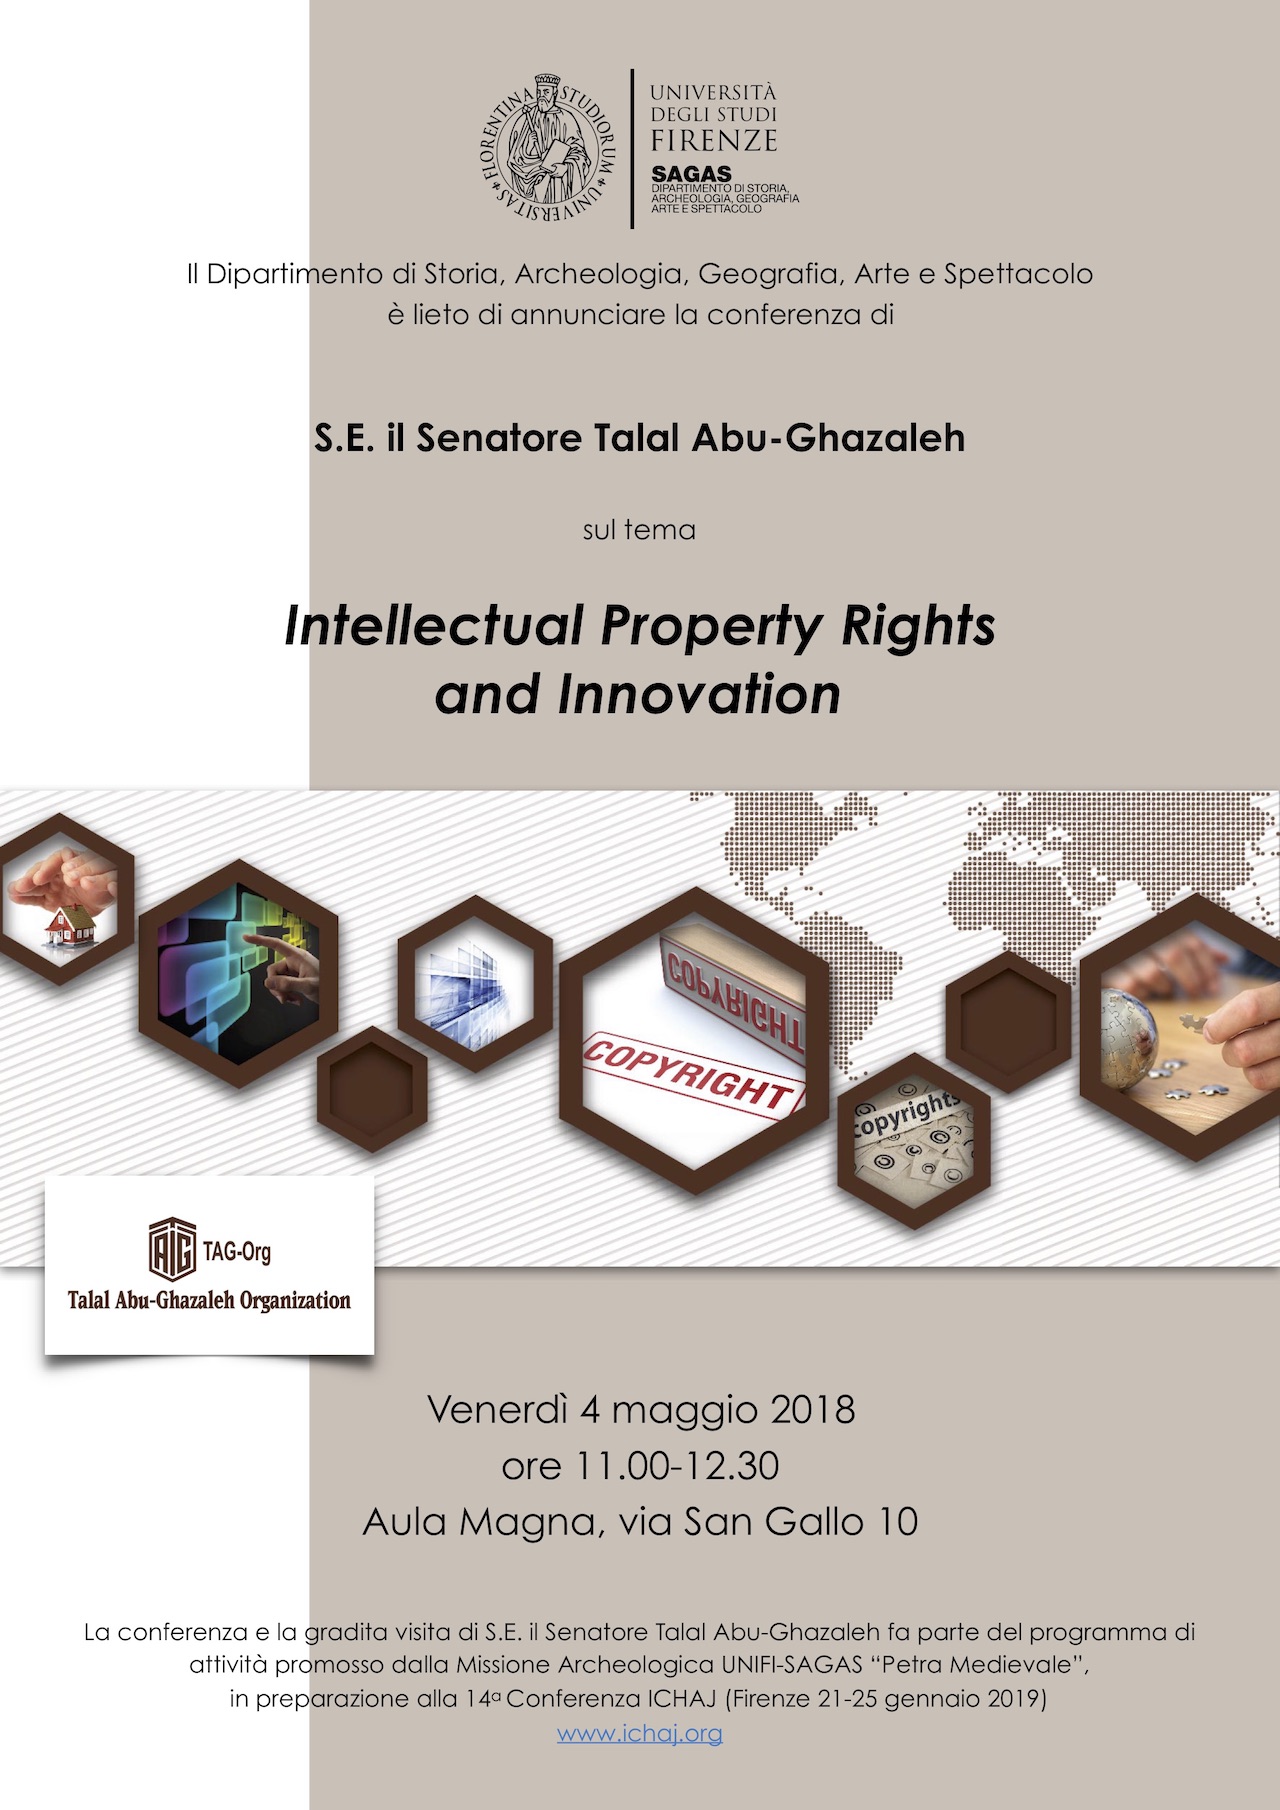 "Intellectual Property Rights and Innovation"